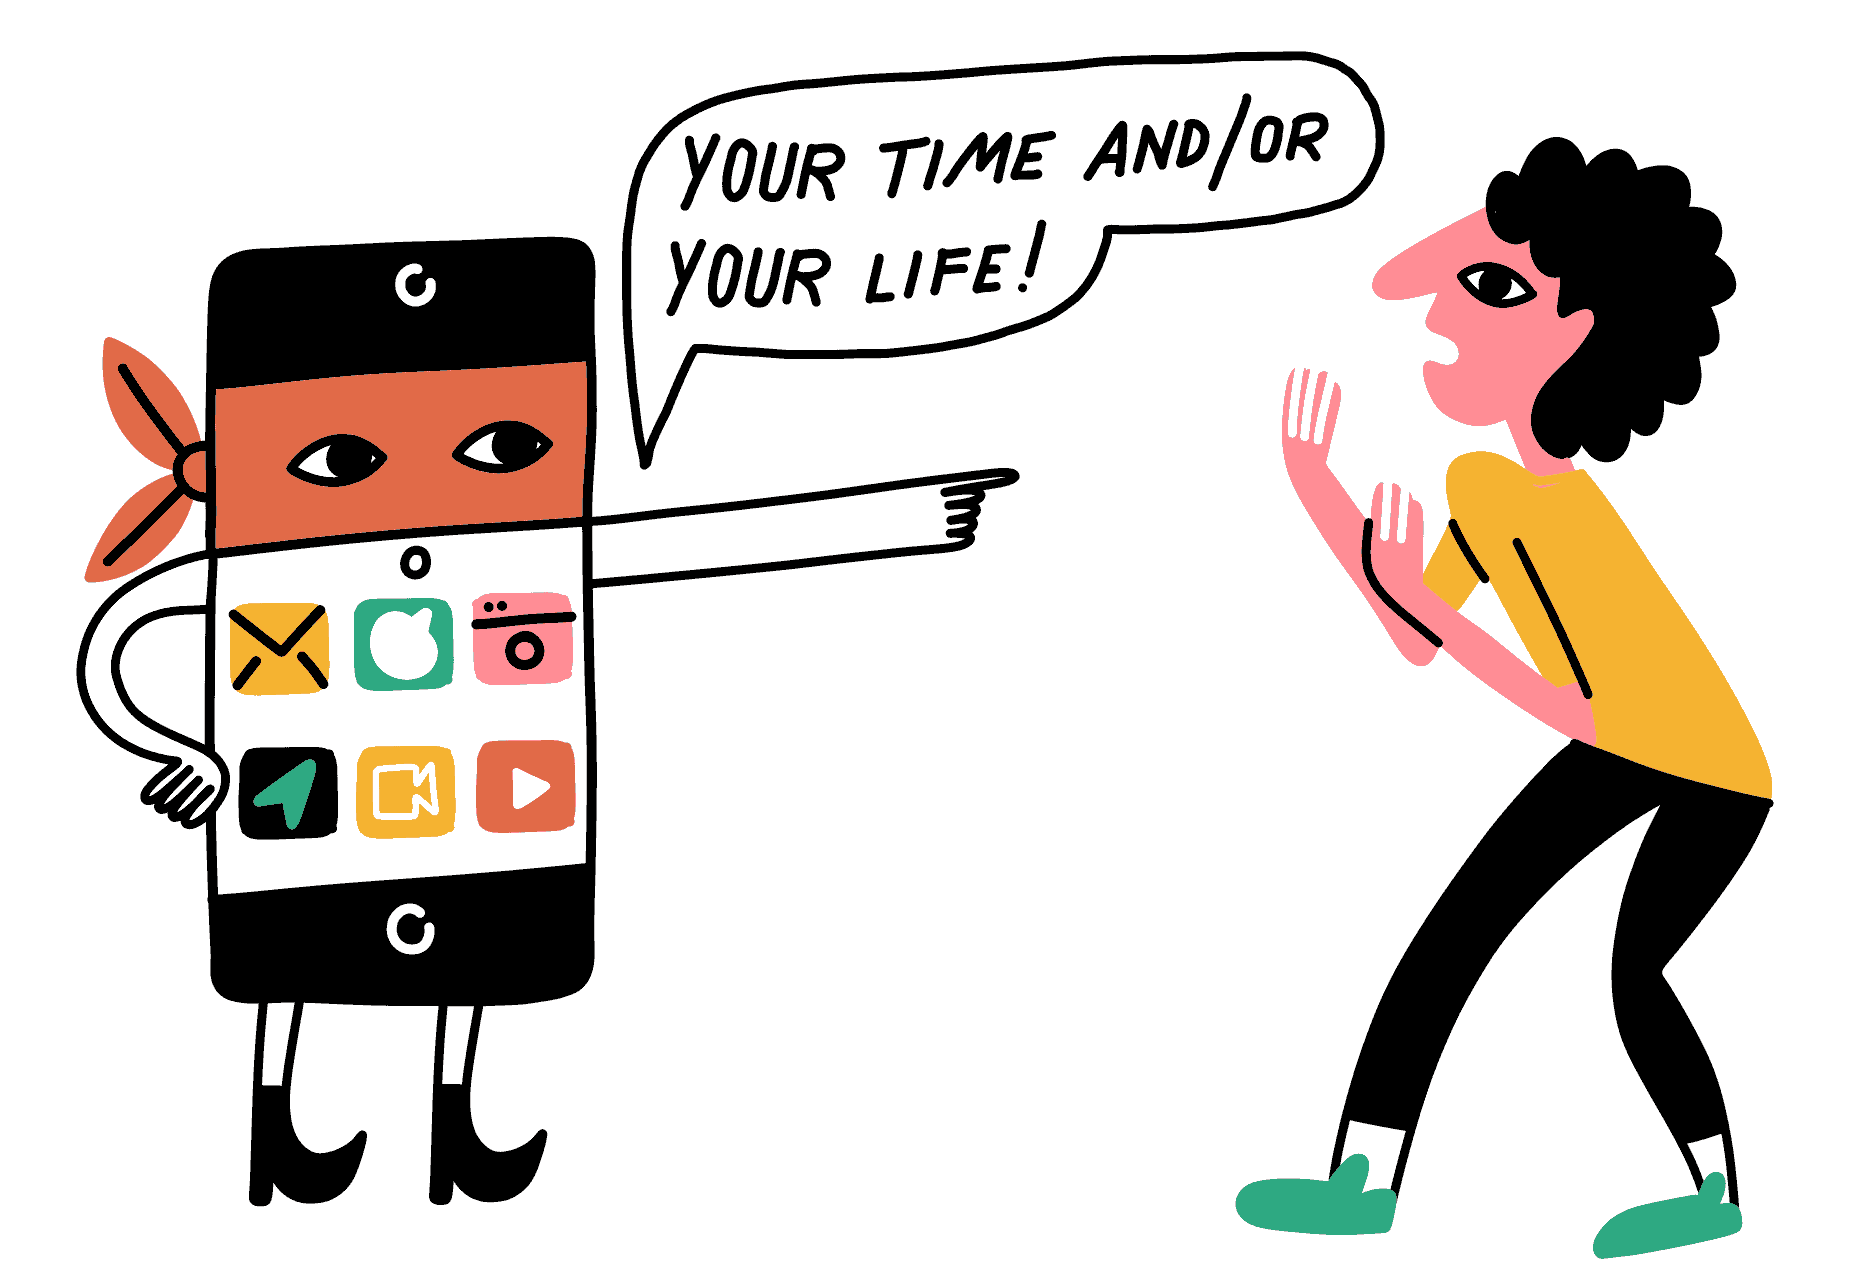 Cartoon of a cell phone as a bandit demanding woman’s time and/or life